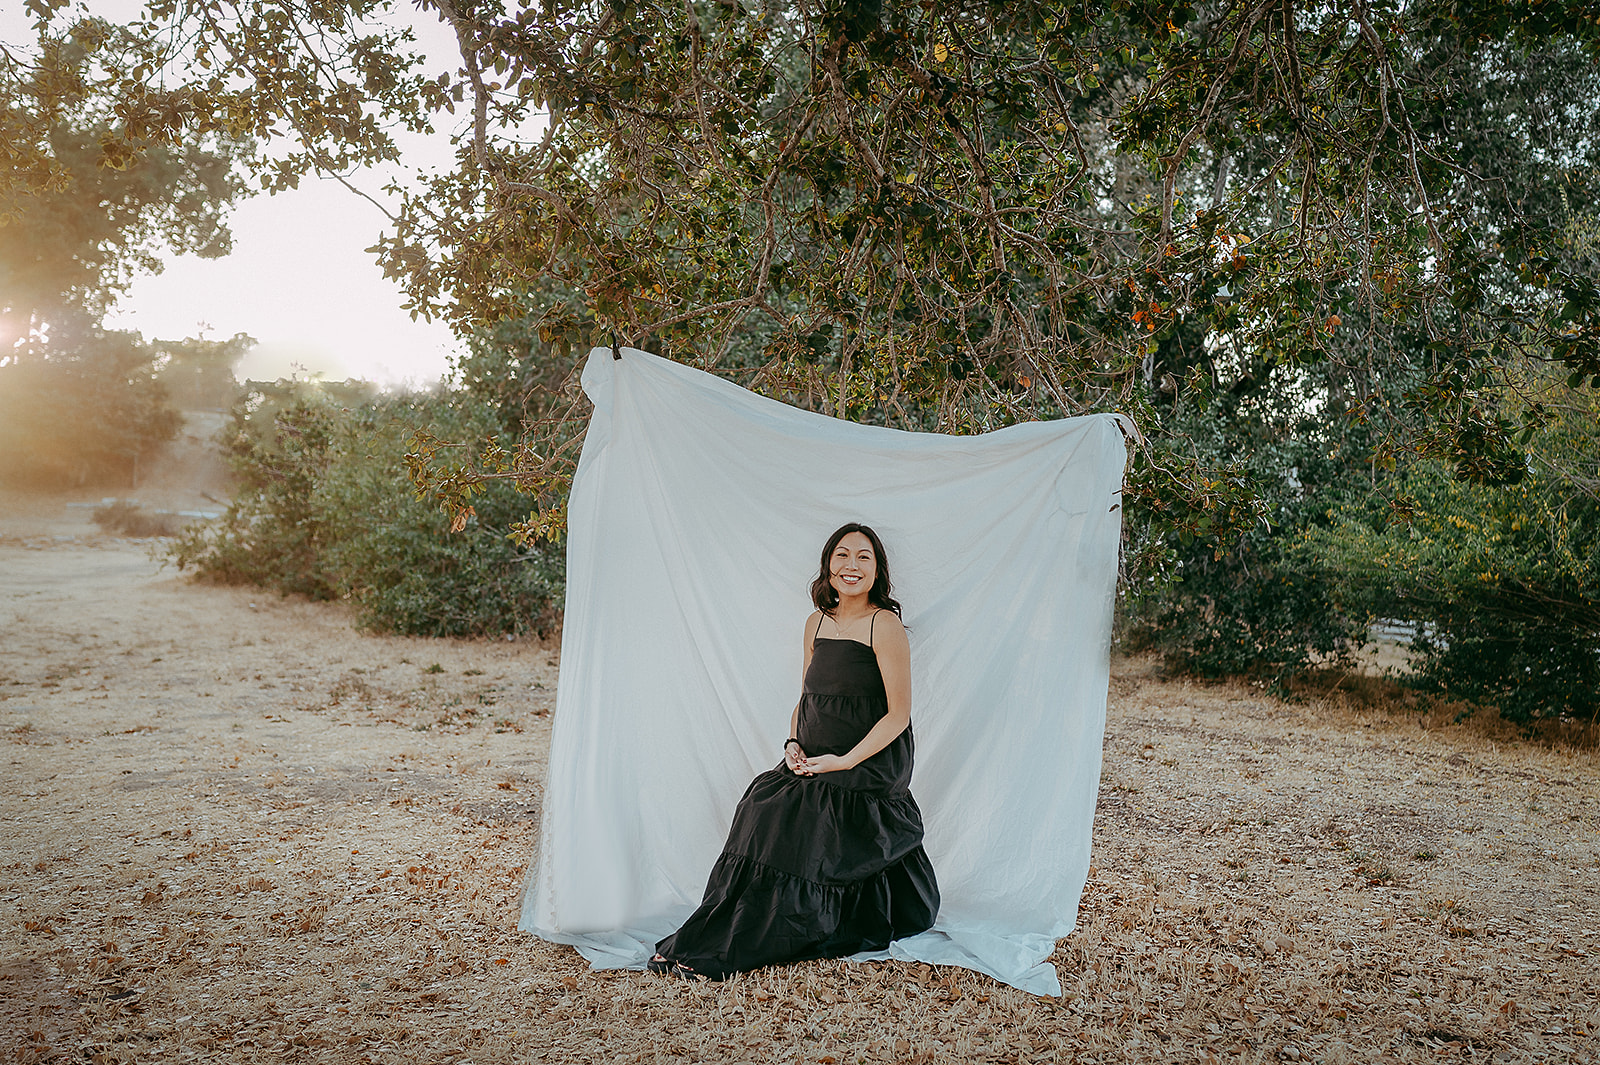 Maternity photos in front of a white cloth hanging from a tree